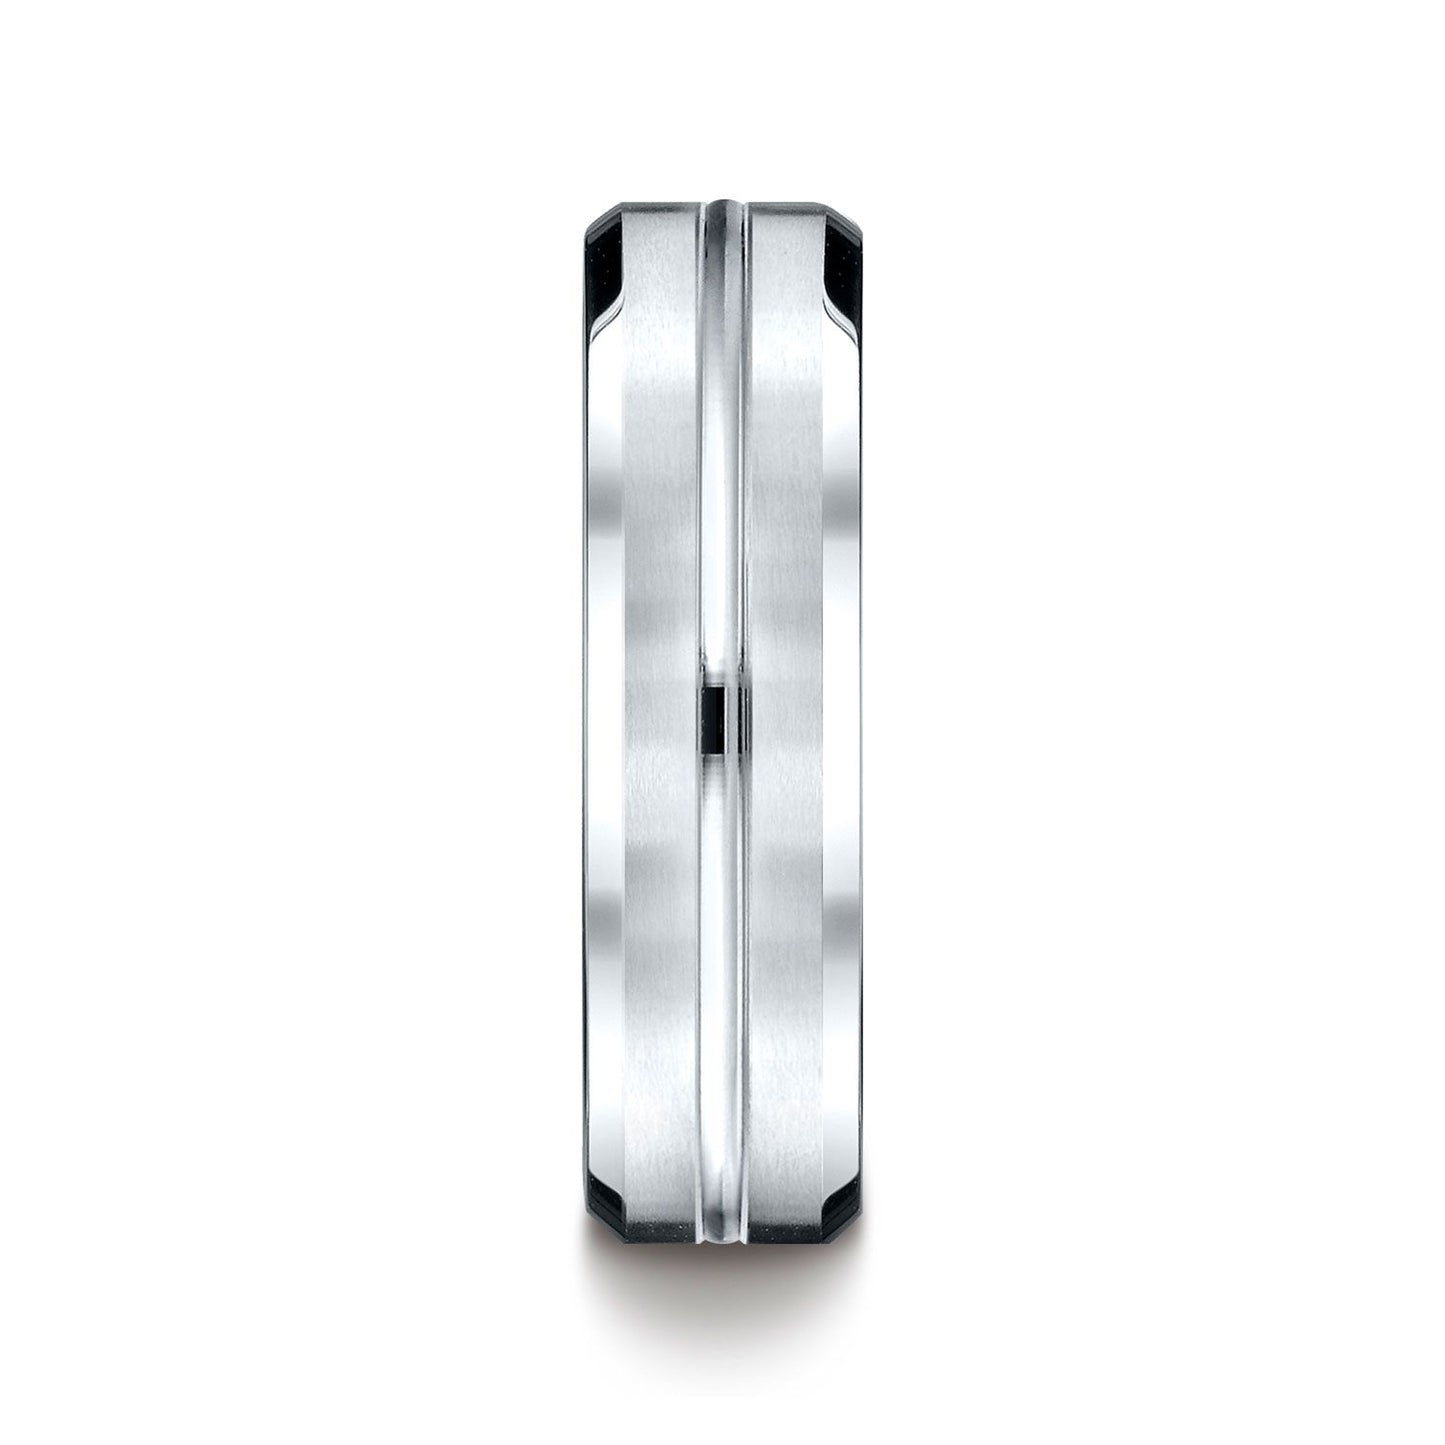 14k White Gold 6mm Comfort-fit Satin-finished With High Polished Cut Carved Design Band